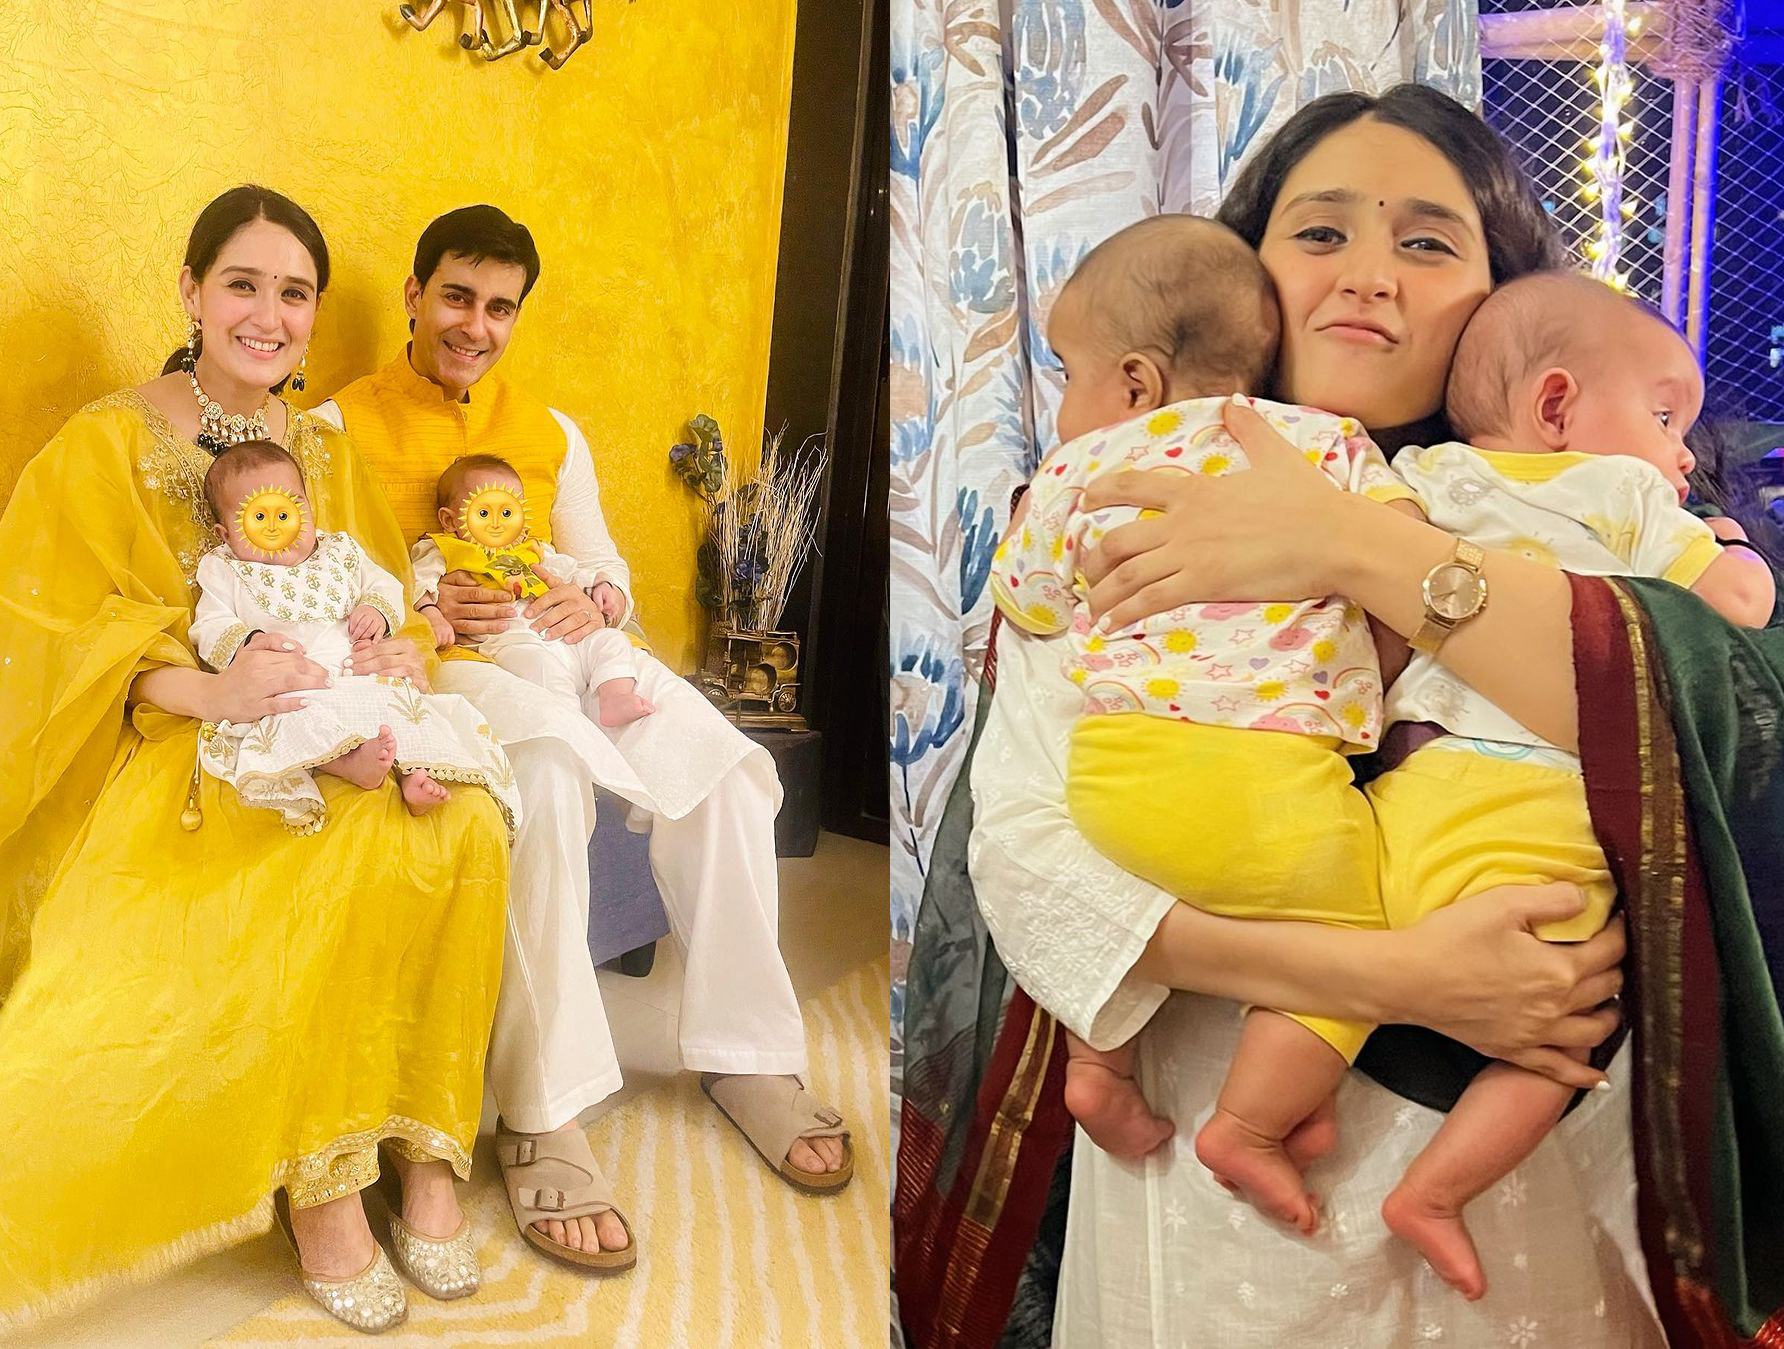 Exclusive - Gautam Rode And Pankhuri Awasthy Shows Faces Of Their Children Radhya And Raditya!